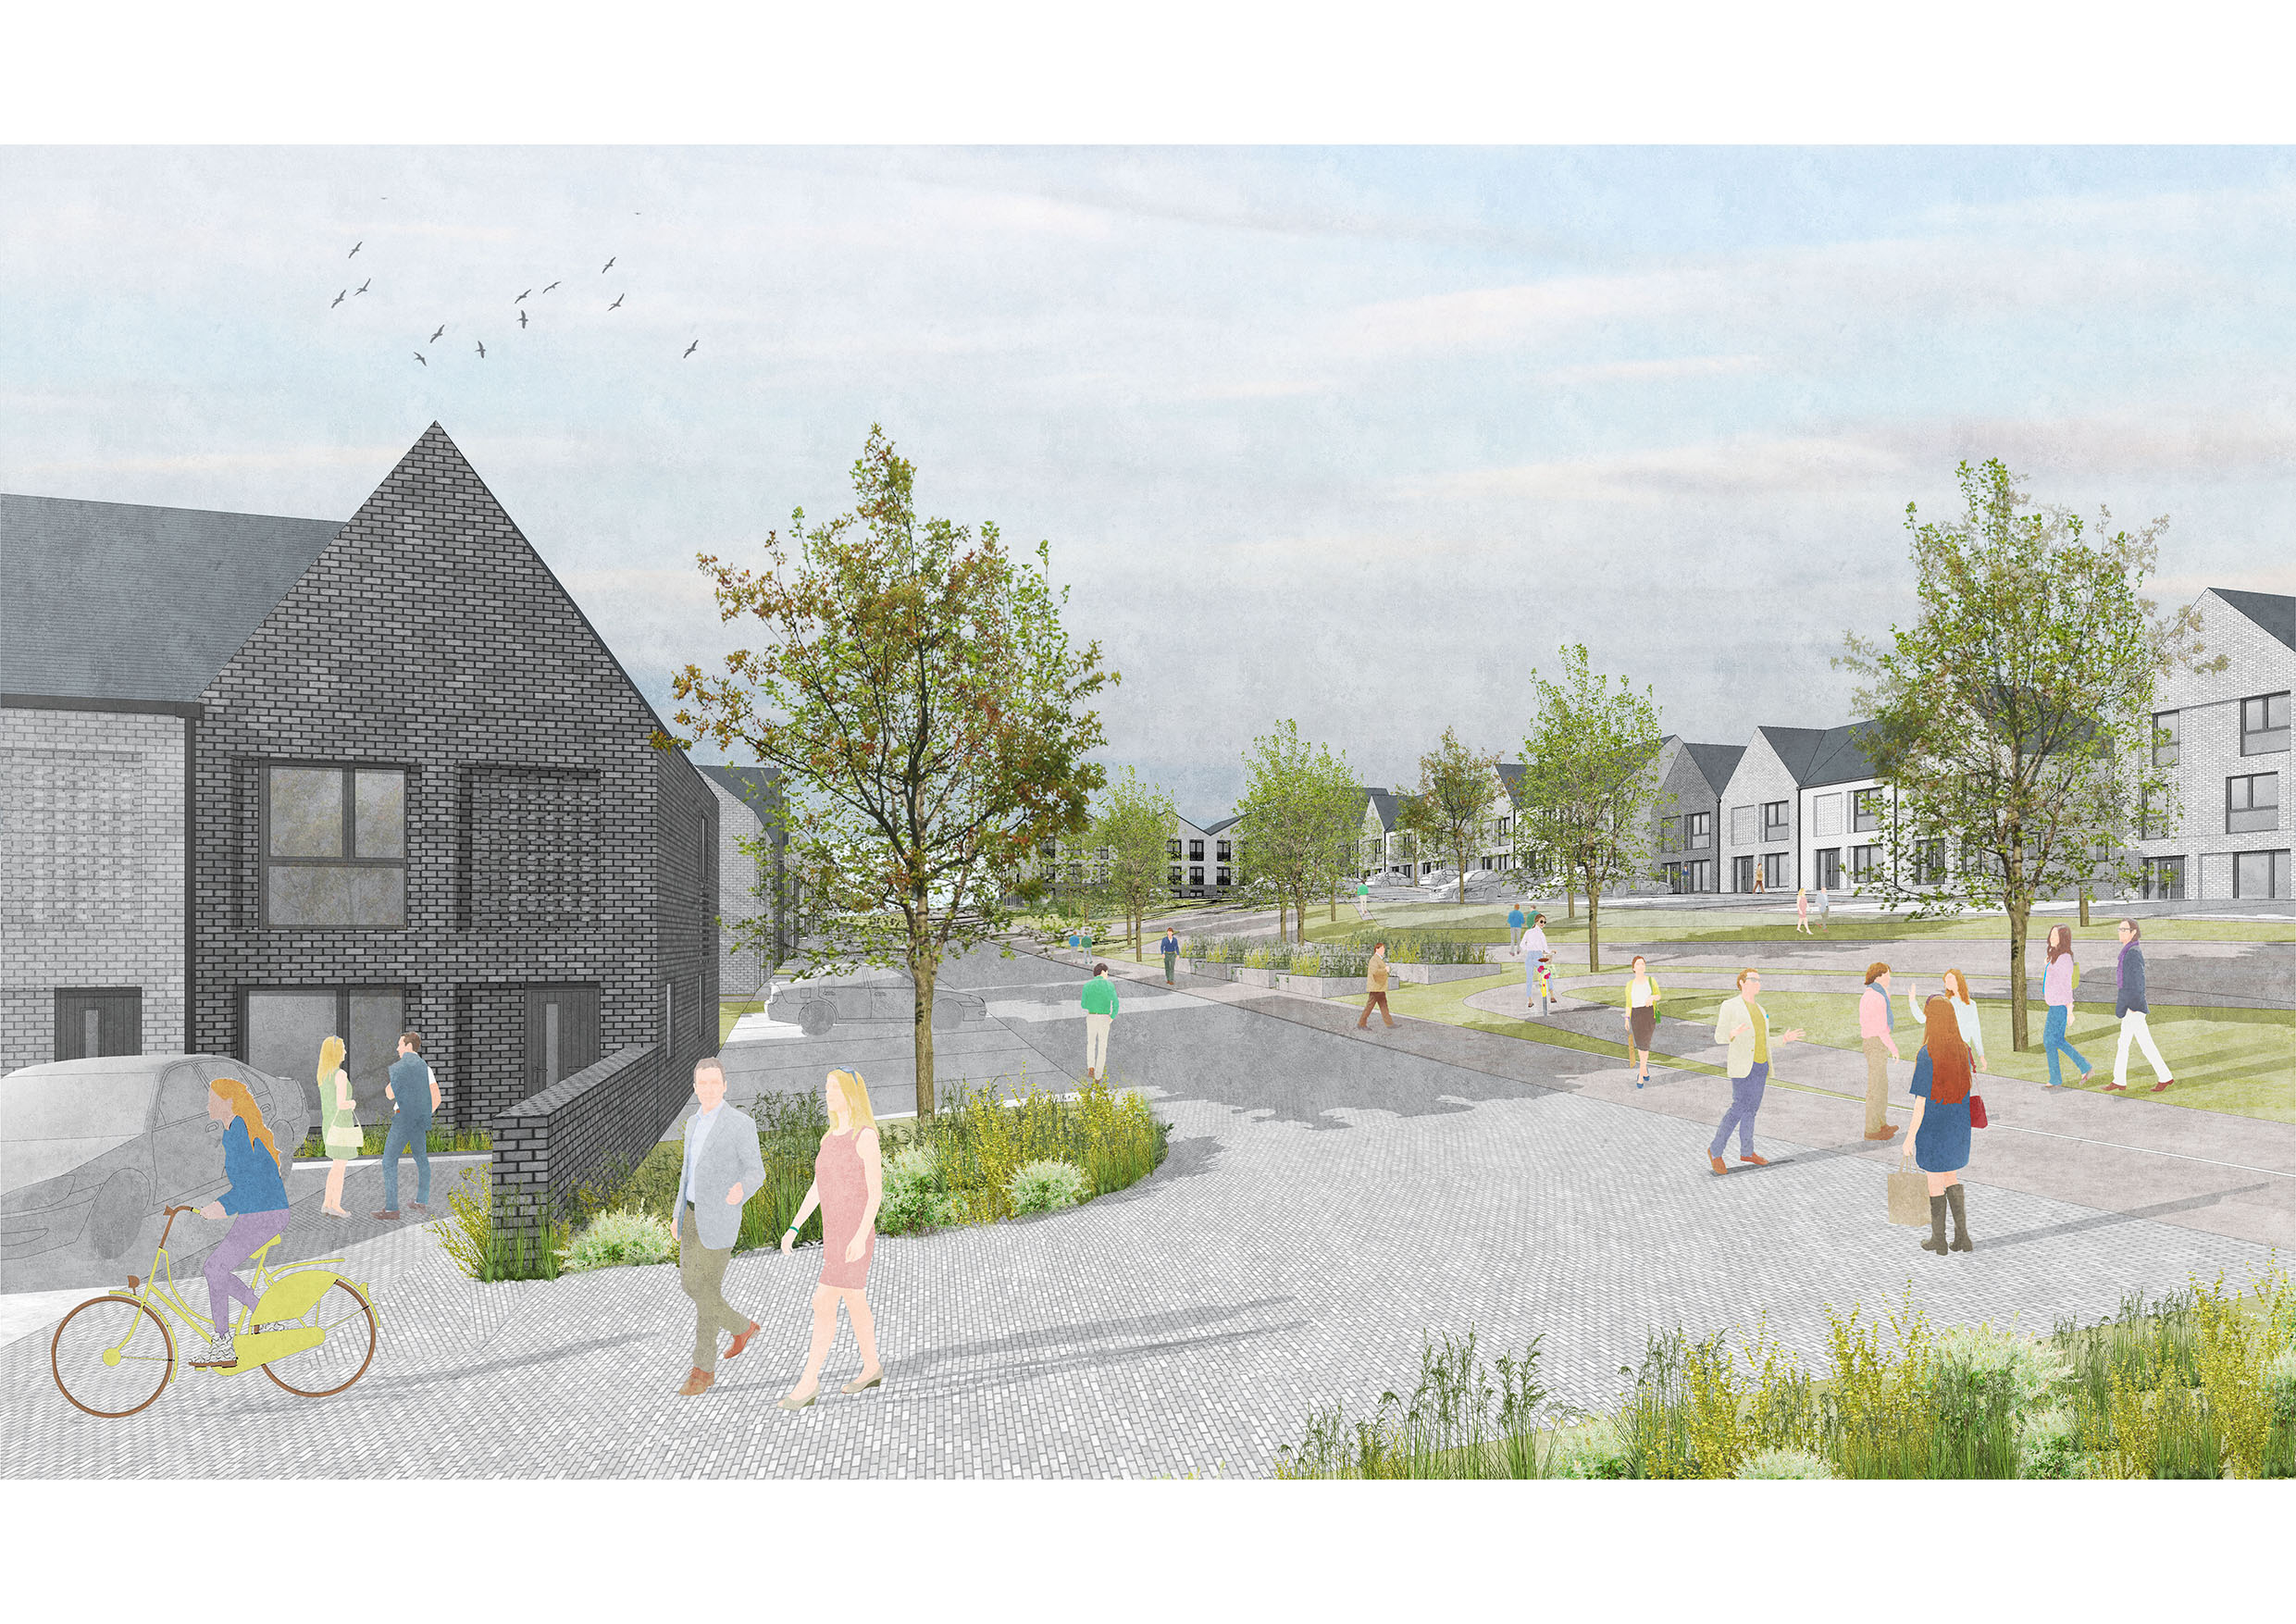 Second phase of Cambuslang housing development begins